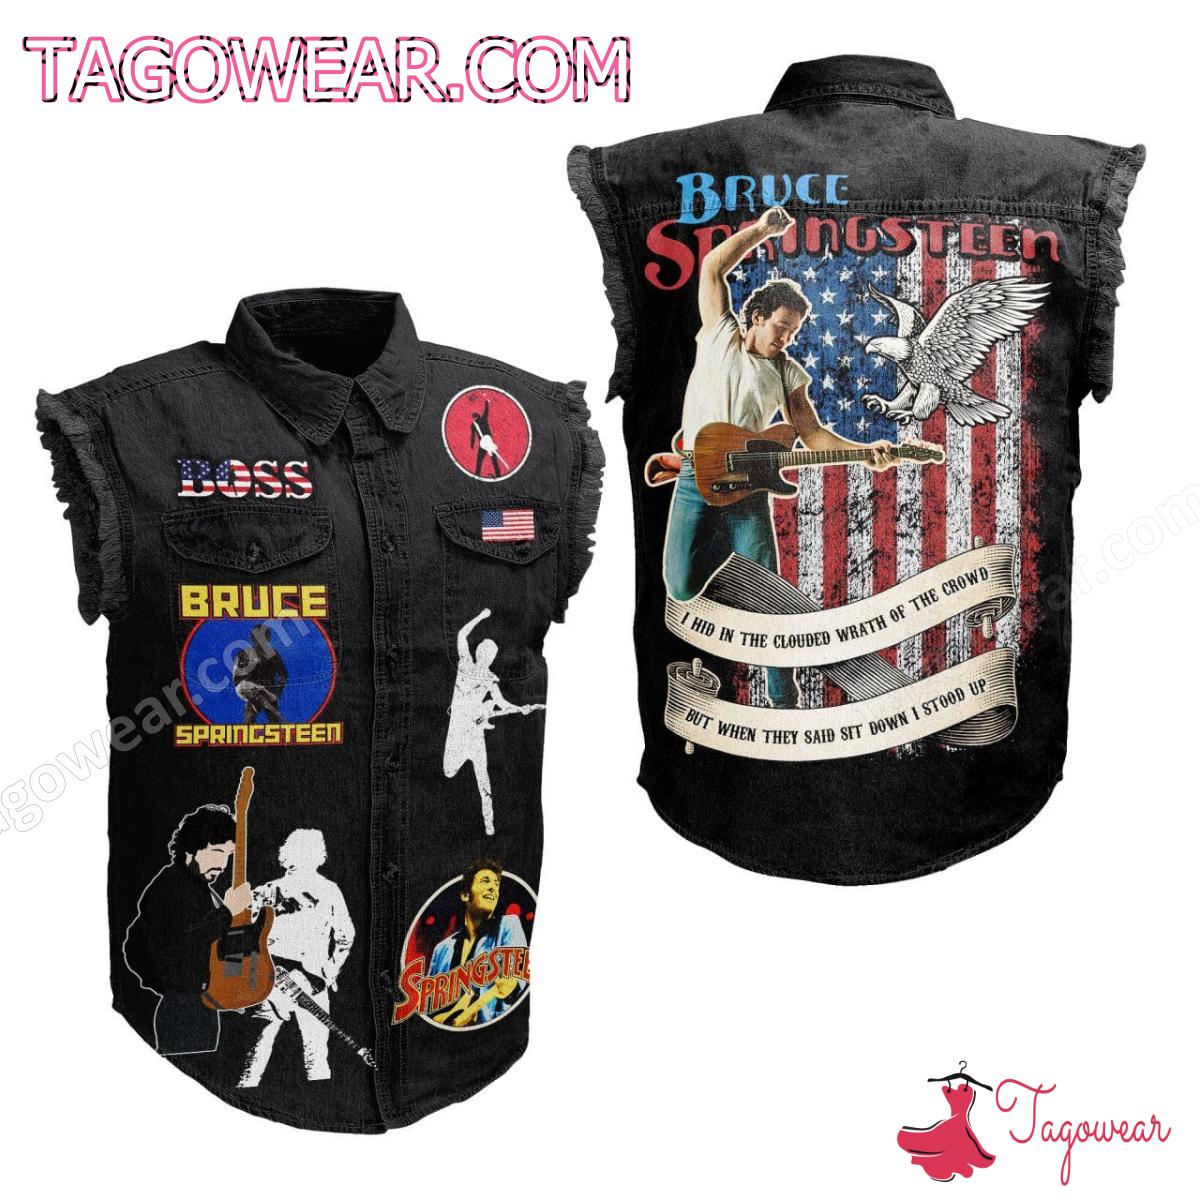 Bruce Springsteen I Hid In The Cloud Wrath Of The Crowd American Flag Denim Vest